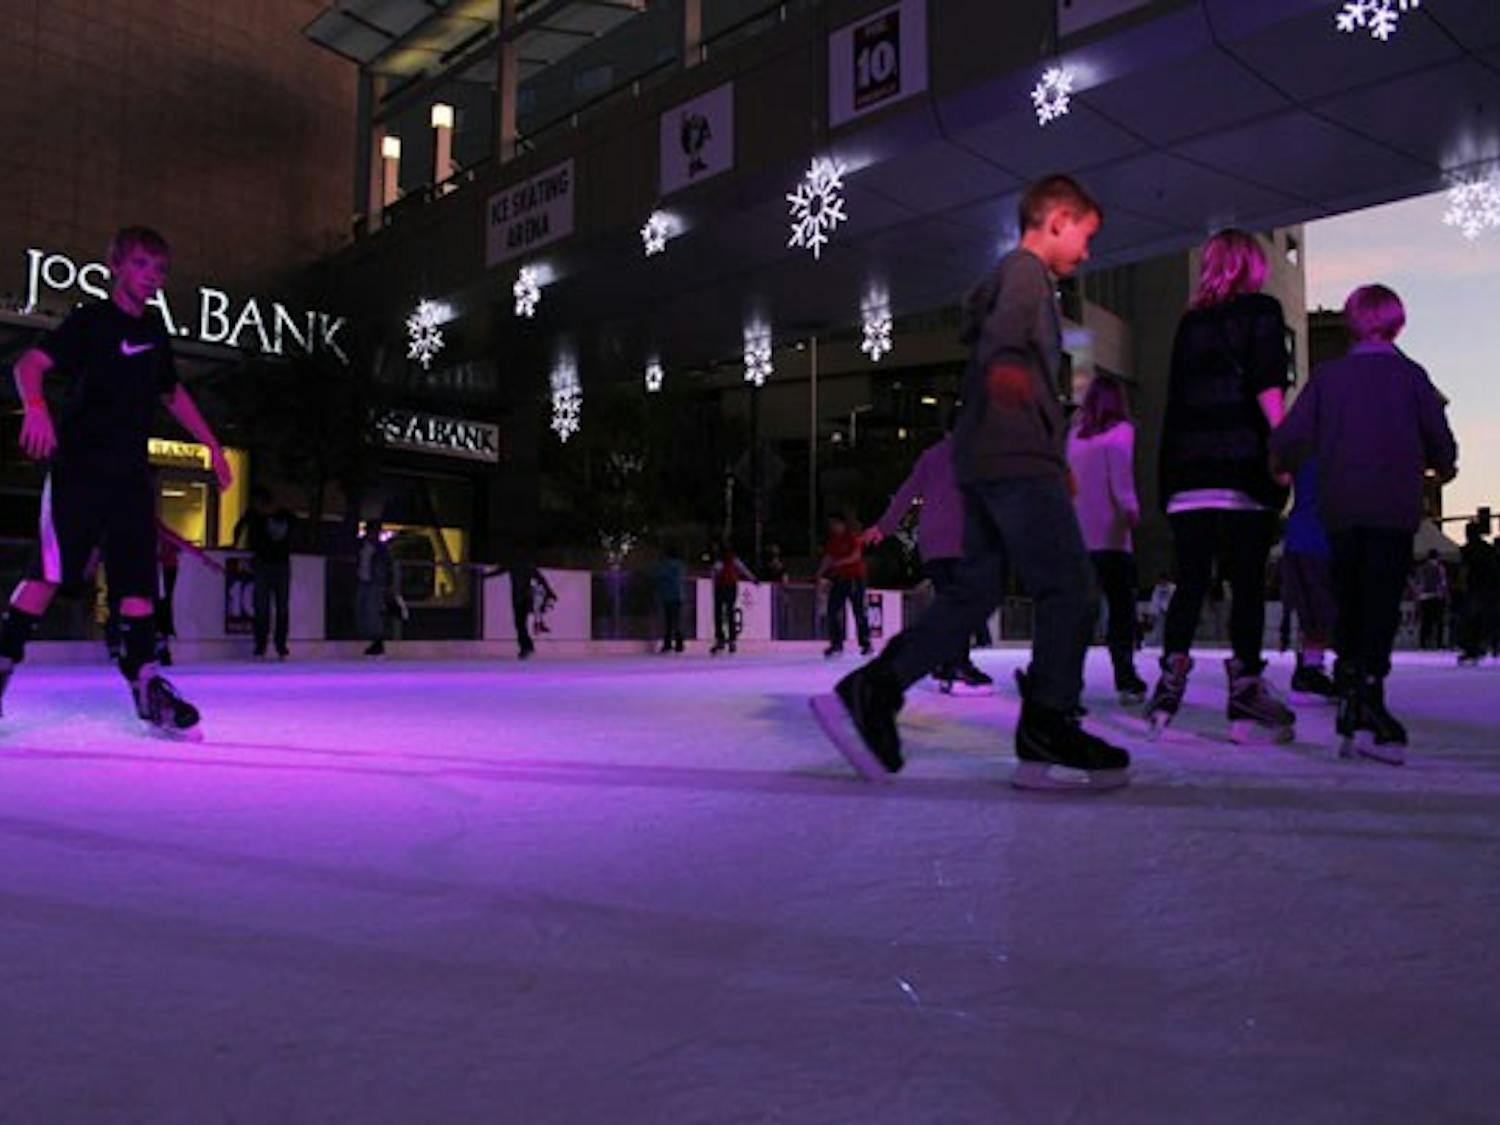 NRG hosts CitySkate, a set-up holiday ice rink, at Cityscape in downtown Phoenix. Friends, couples and families enjoy the temporary outdoor rink to the sound of holiday music. (Photo by Ana Ramirez)